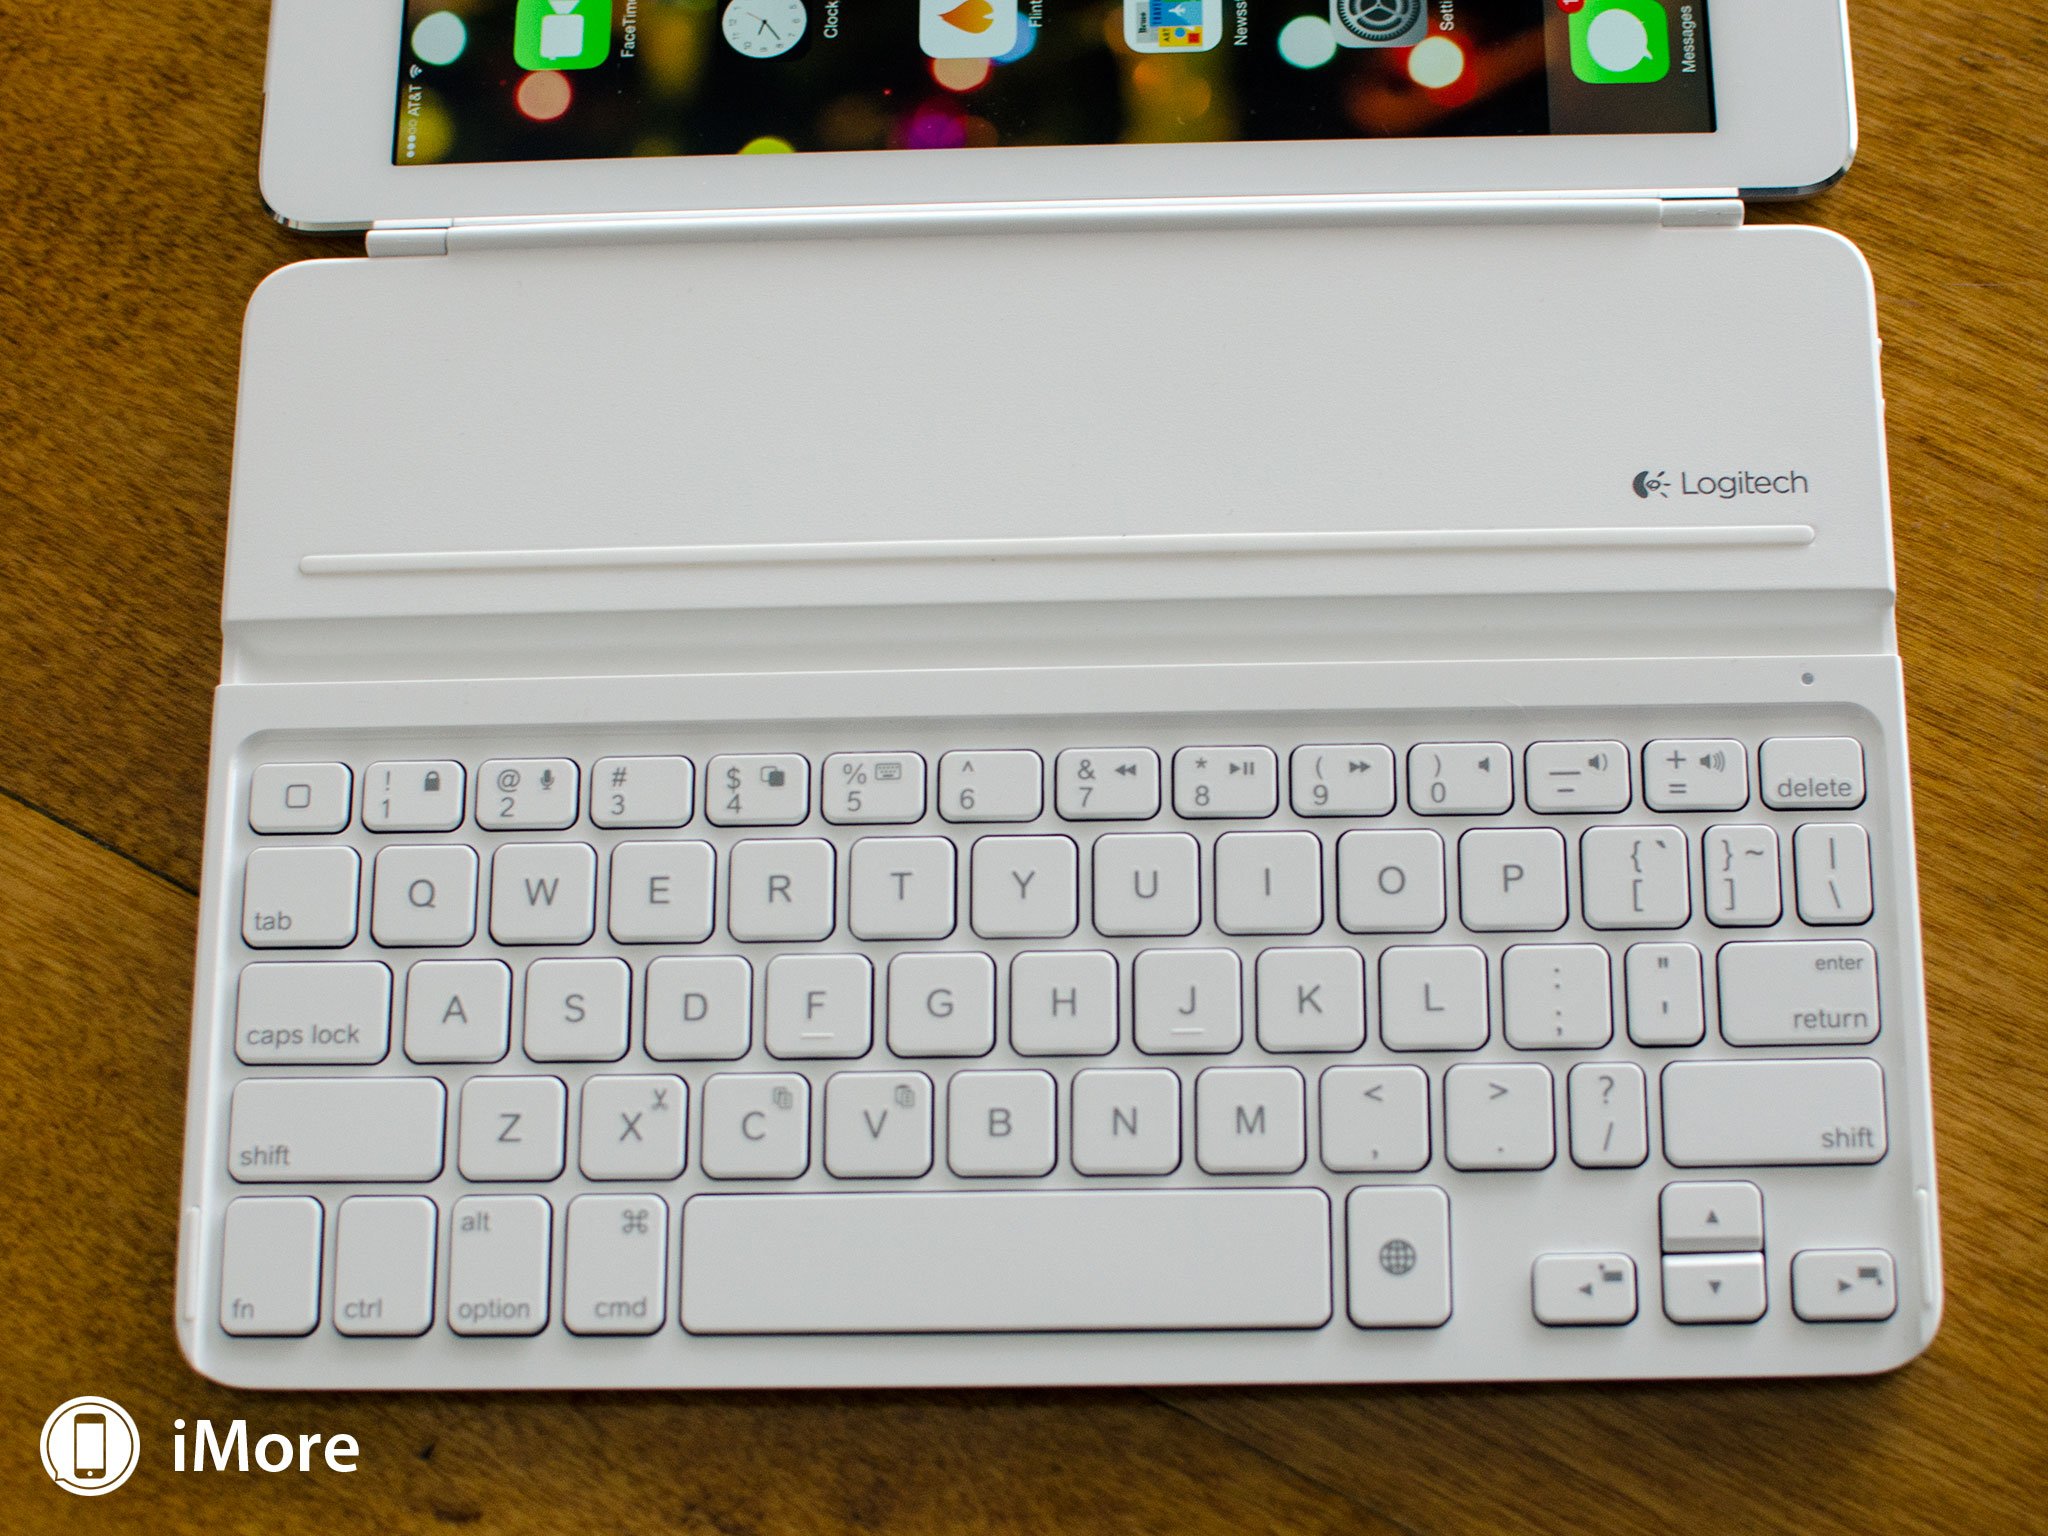 Logitech Ultrathin Keyboard Cover for iPad Air review